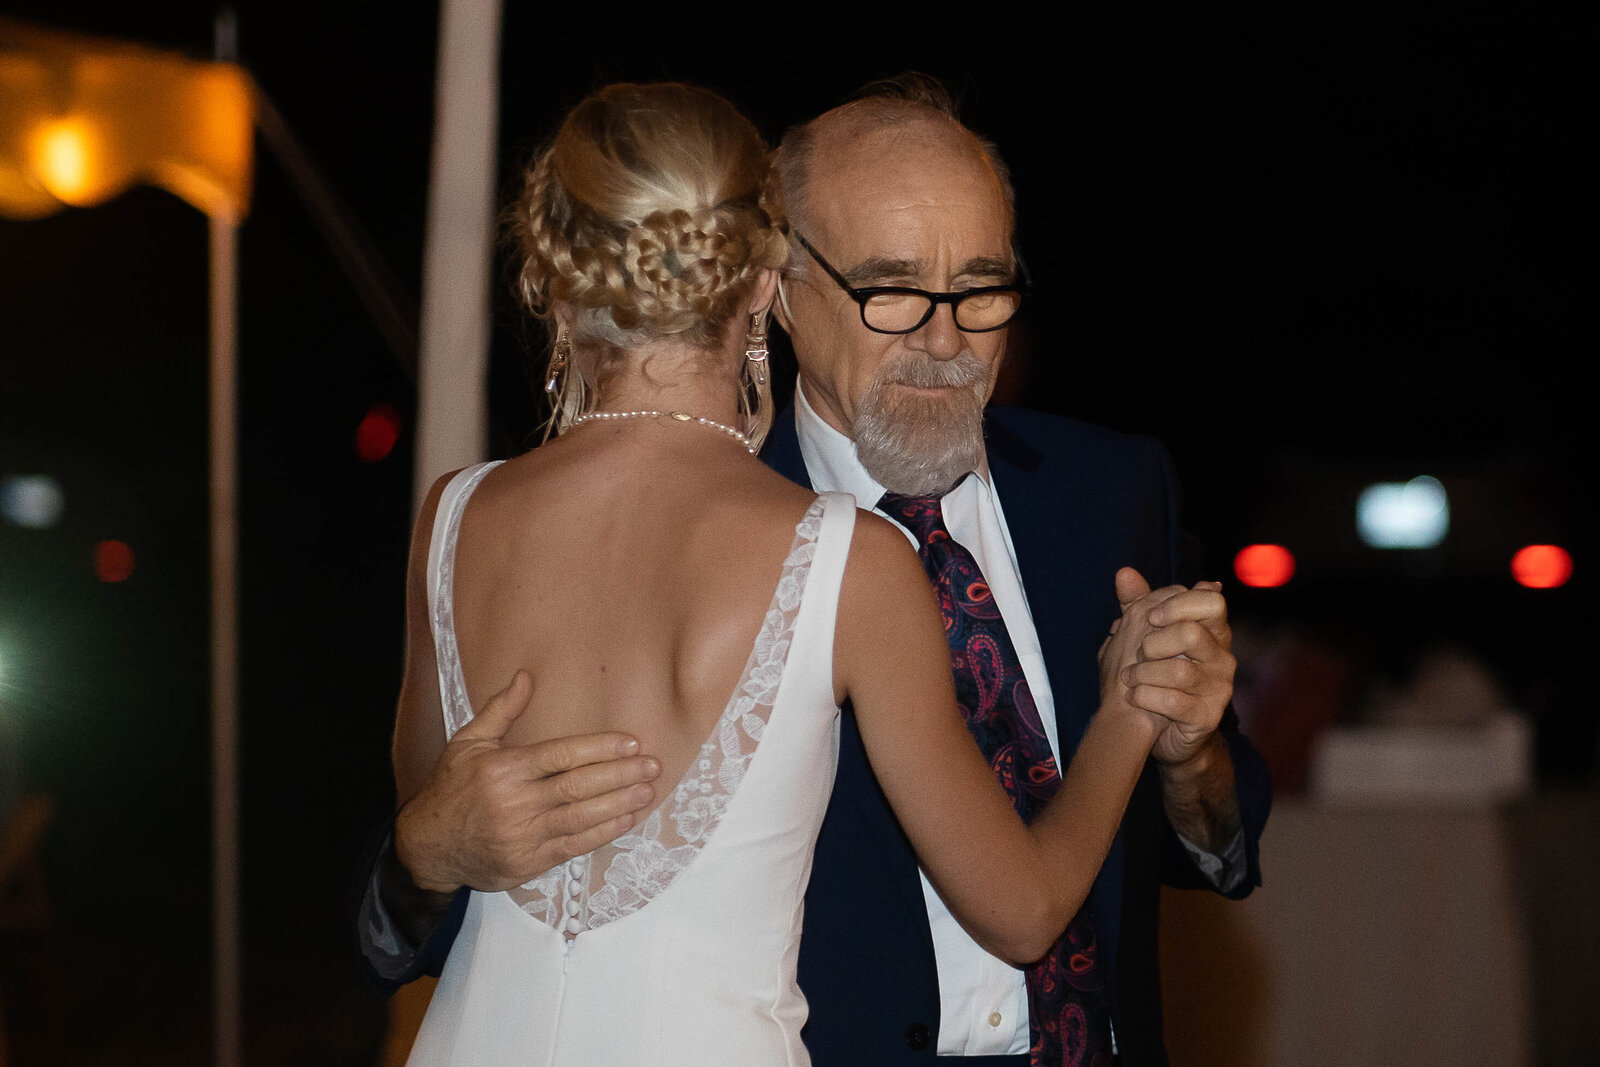 bride with low cut back dress and braided updo hairstyle hugging father in black tux with glasses during father daughter dance at wedding reception by wedding photographer in nashville klem photography